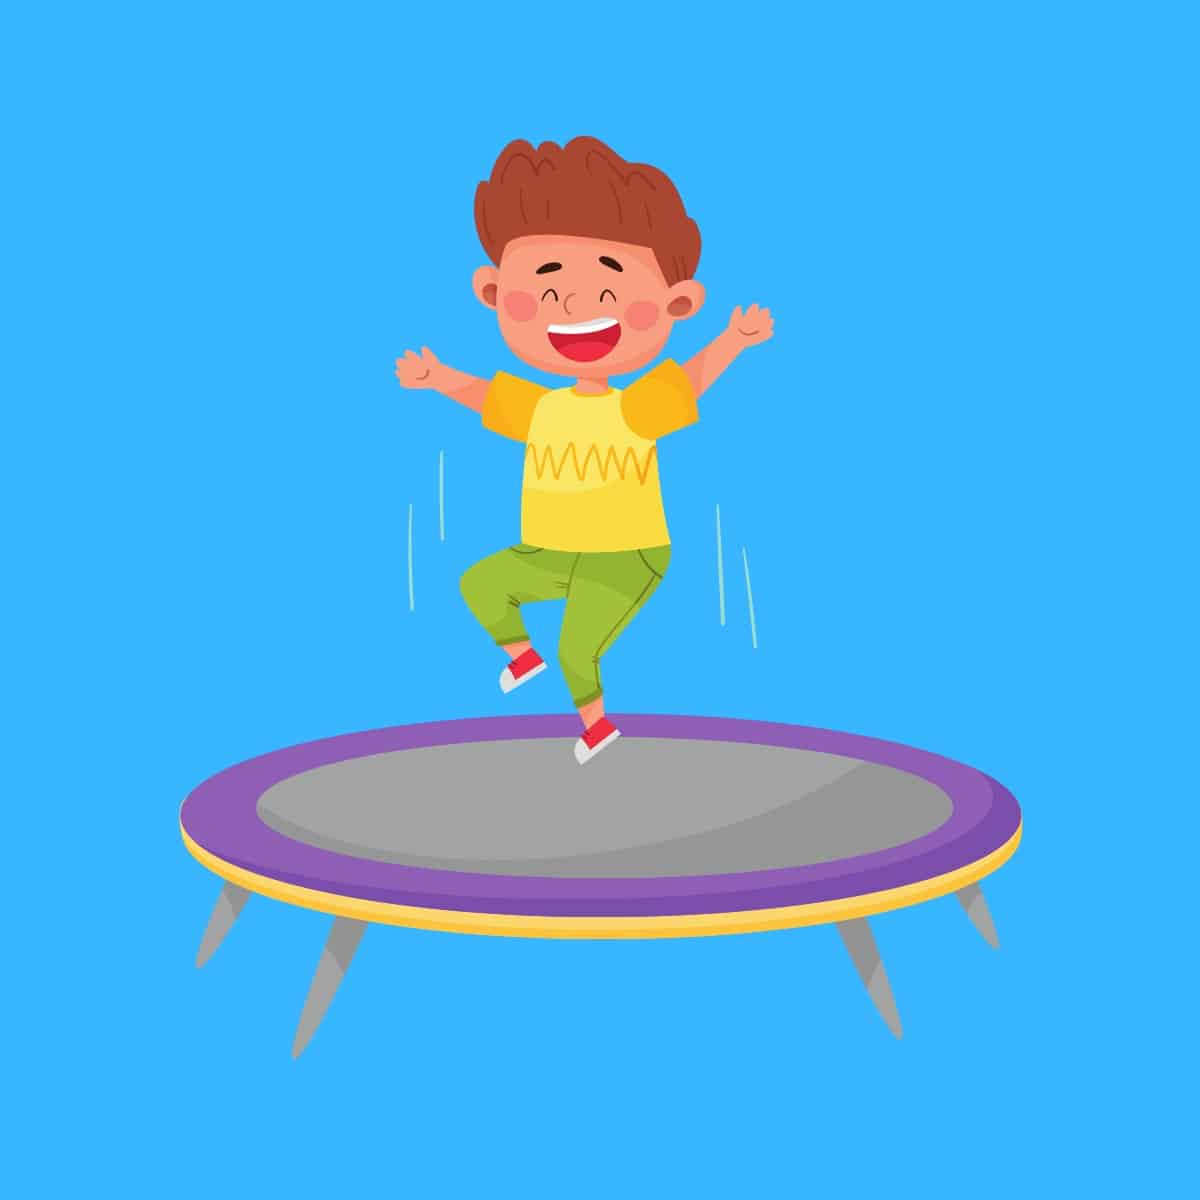 Cartoon graphic of a boy smiling and jumping on a trampoline on a blue background.